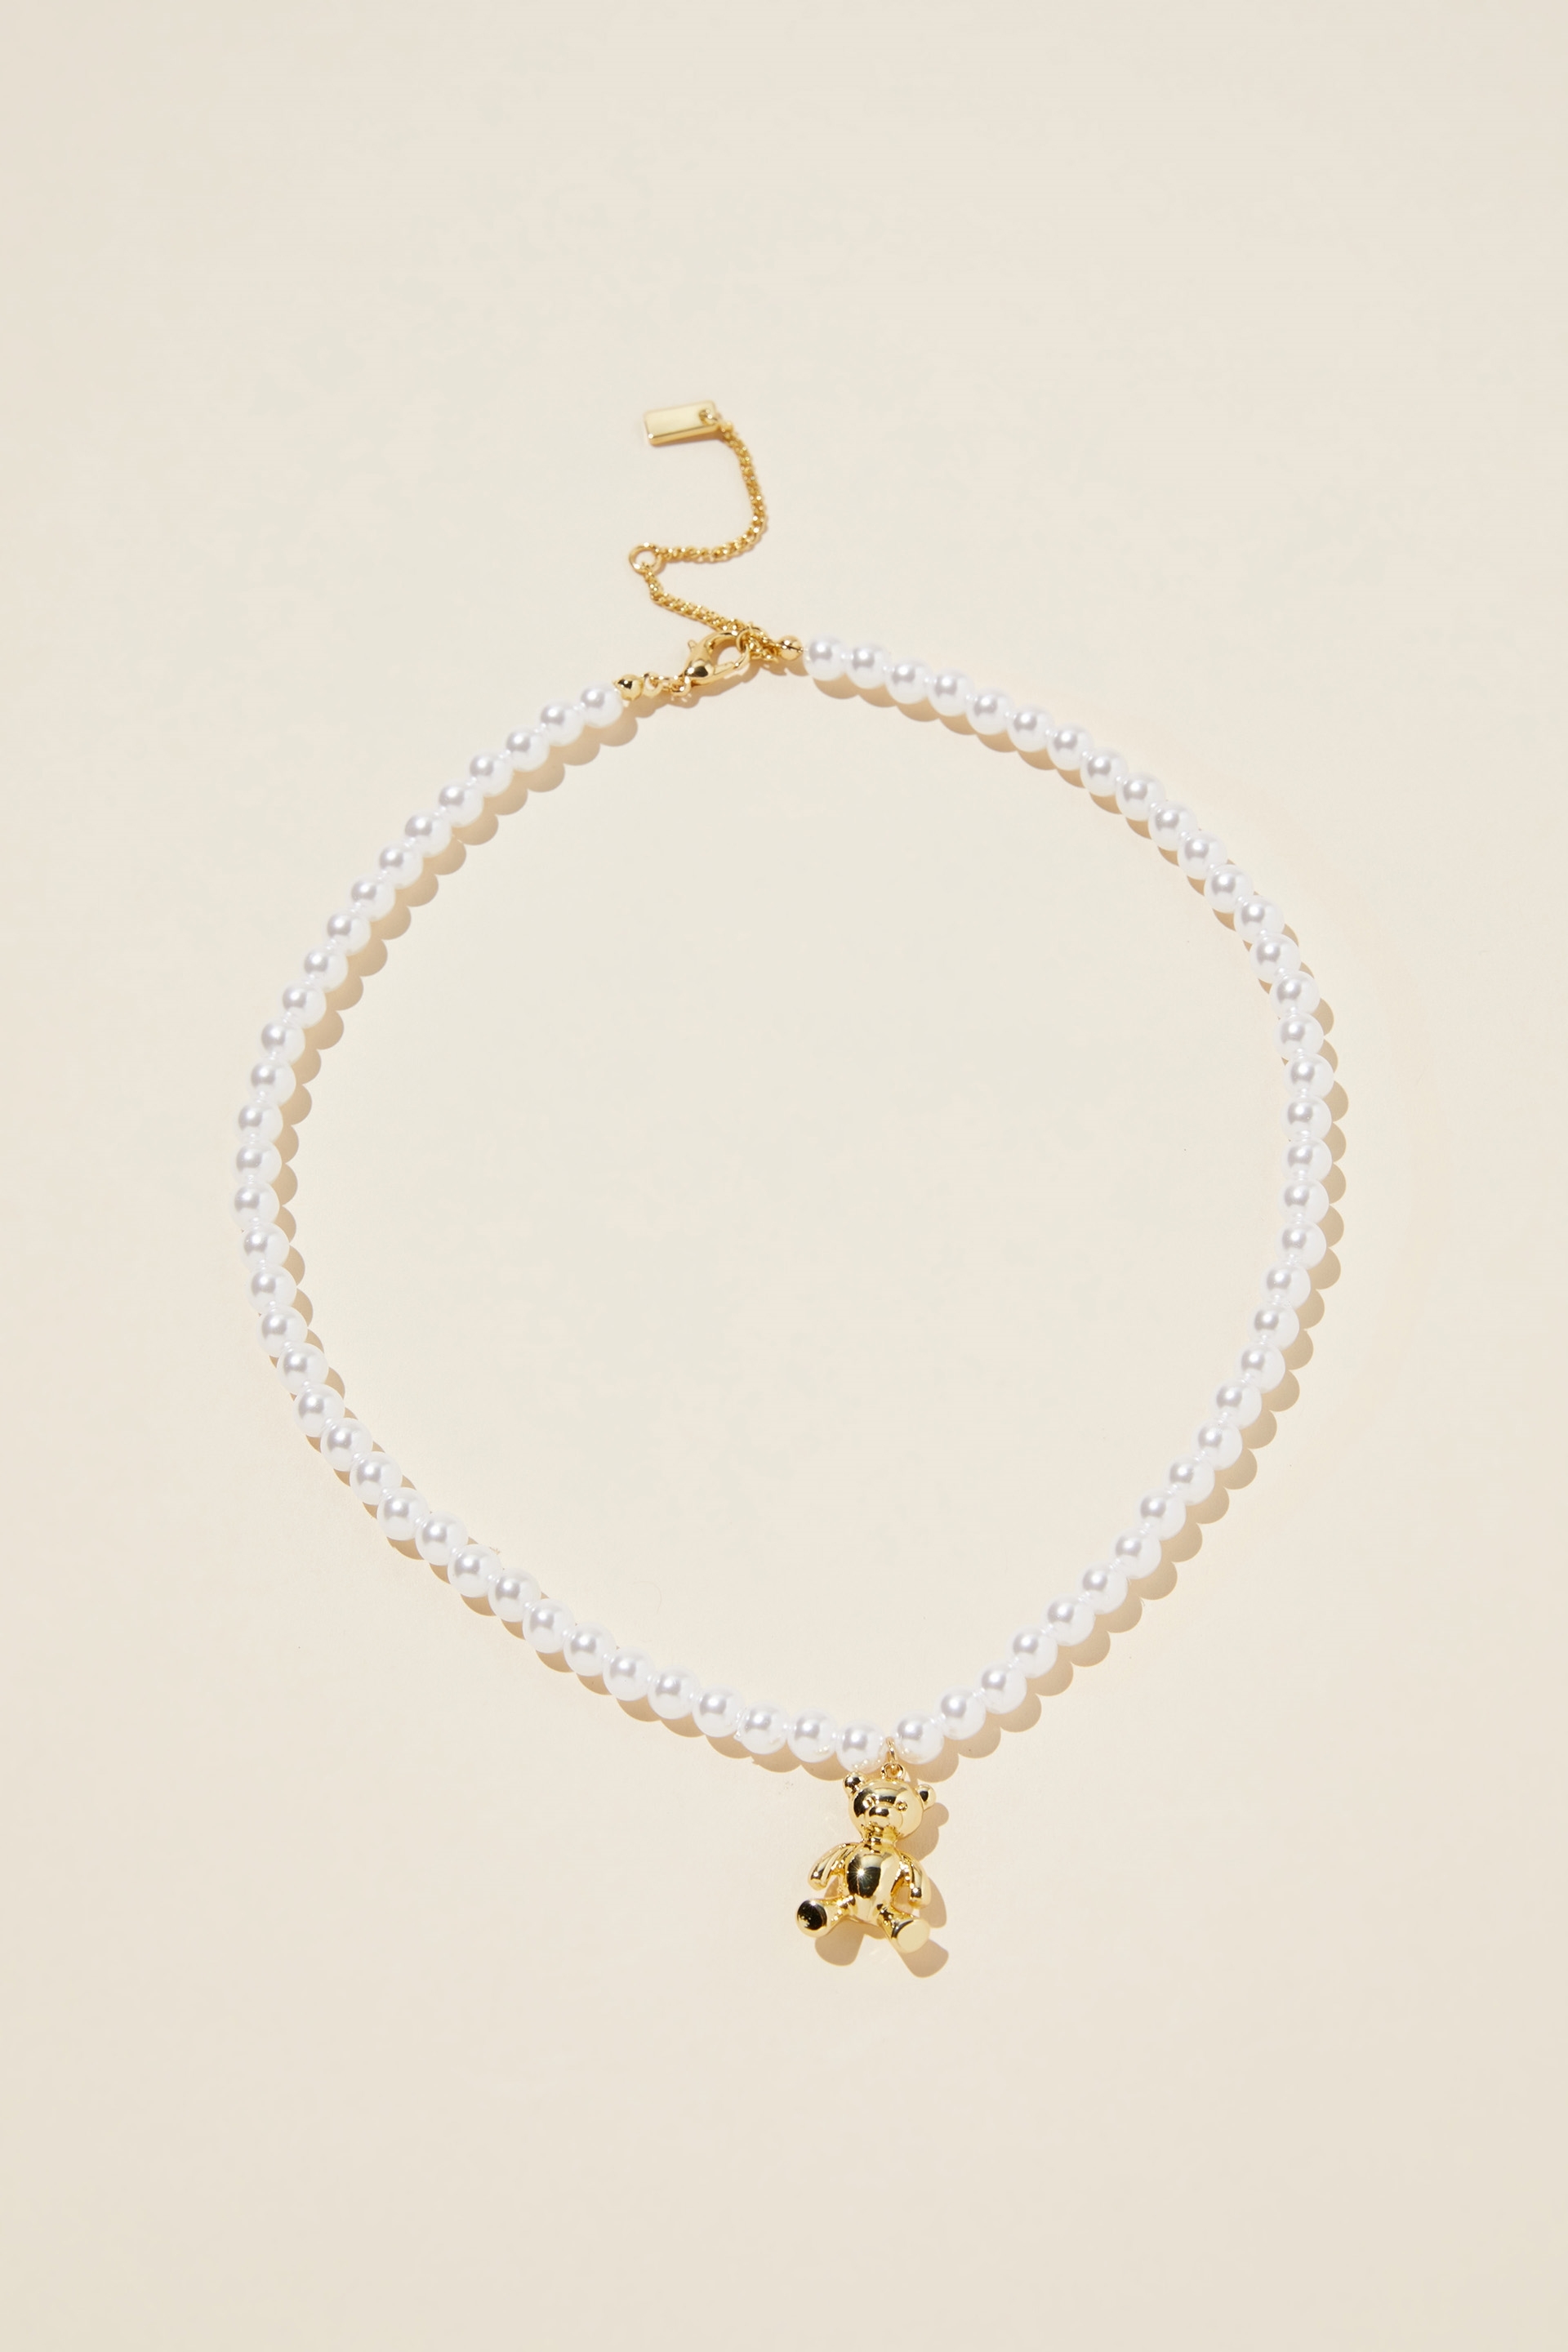 Rubi - Beaded Pendant Necklace - Gold plated pearl teddy bear